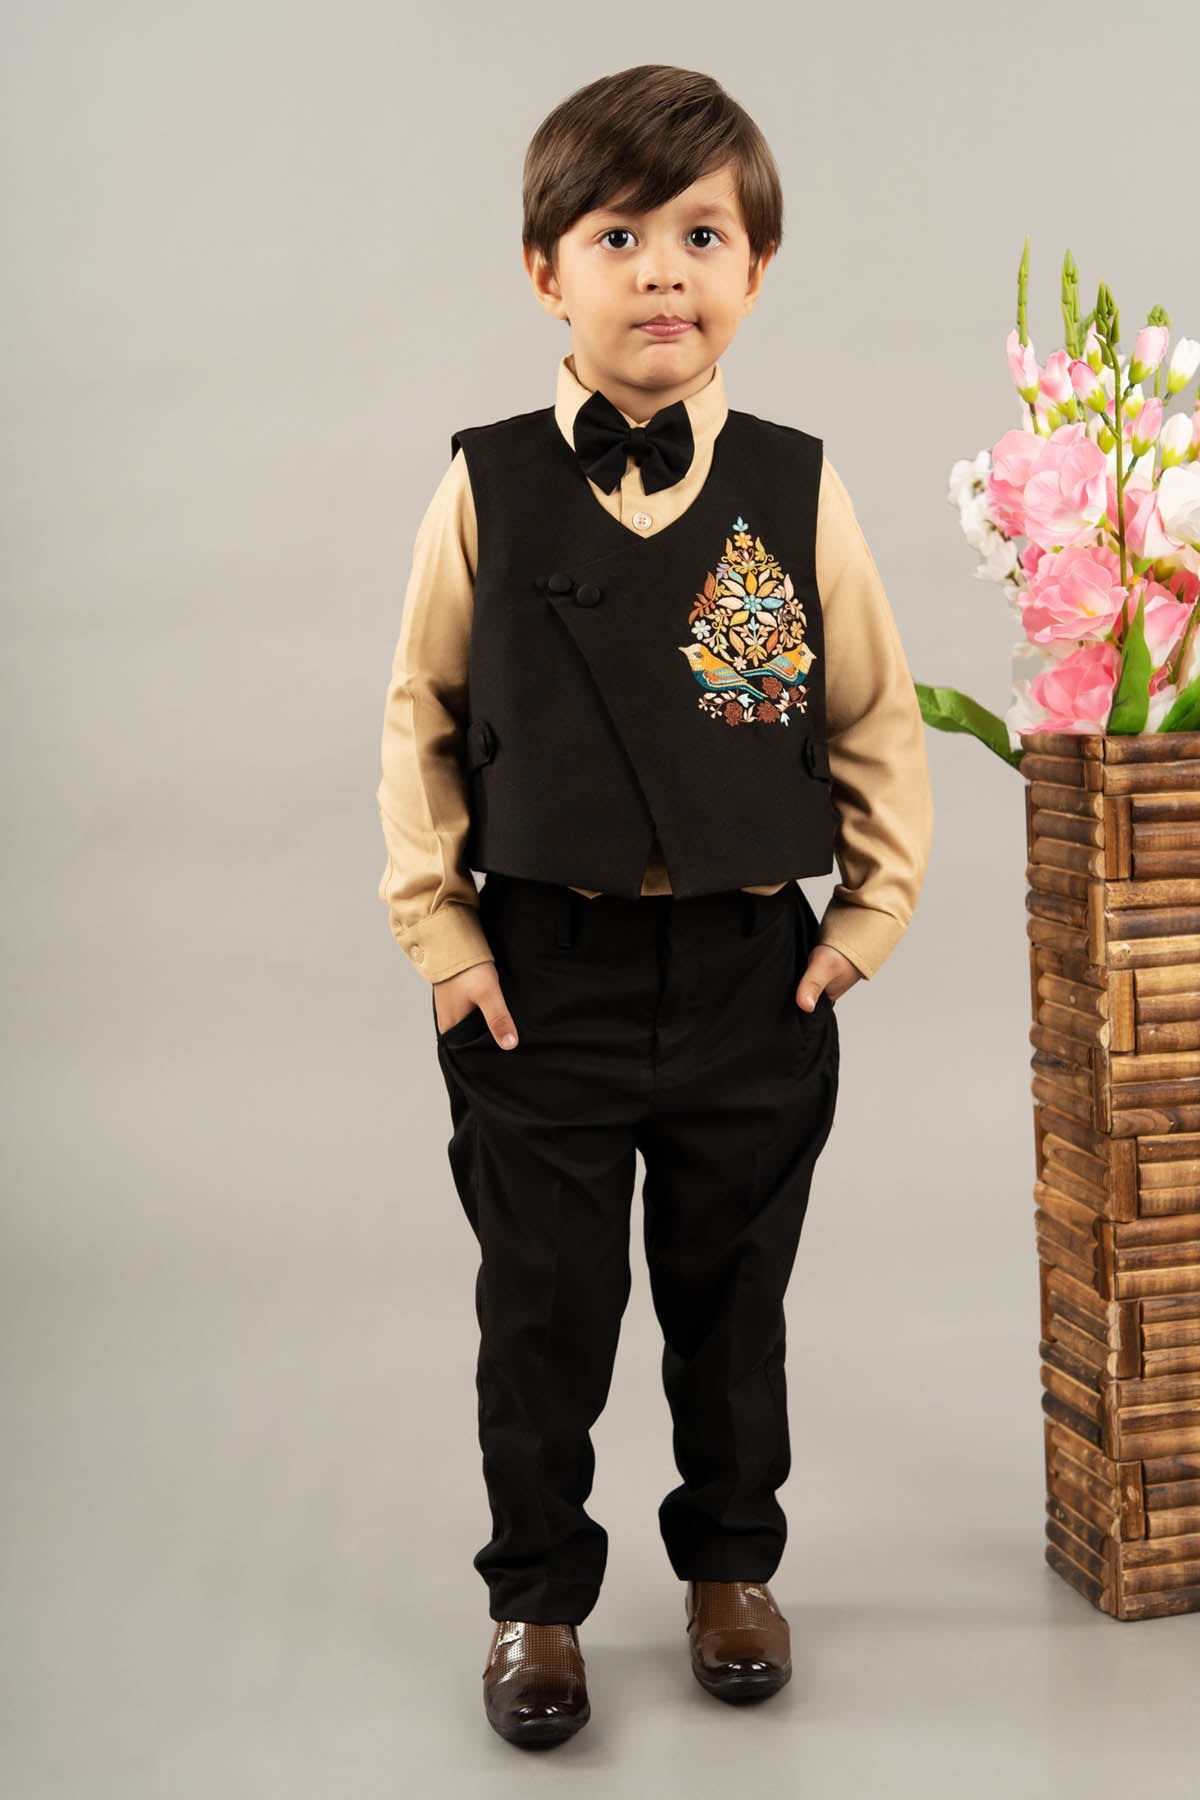 Designer Little Brats Bird Embroidered Suit For Kids Available online at ScrollnShops